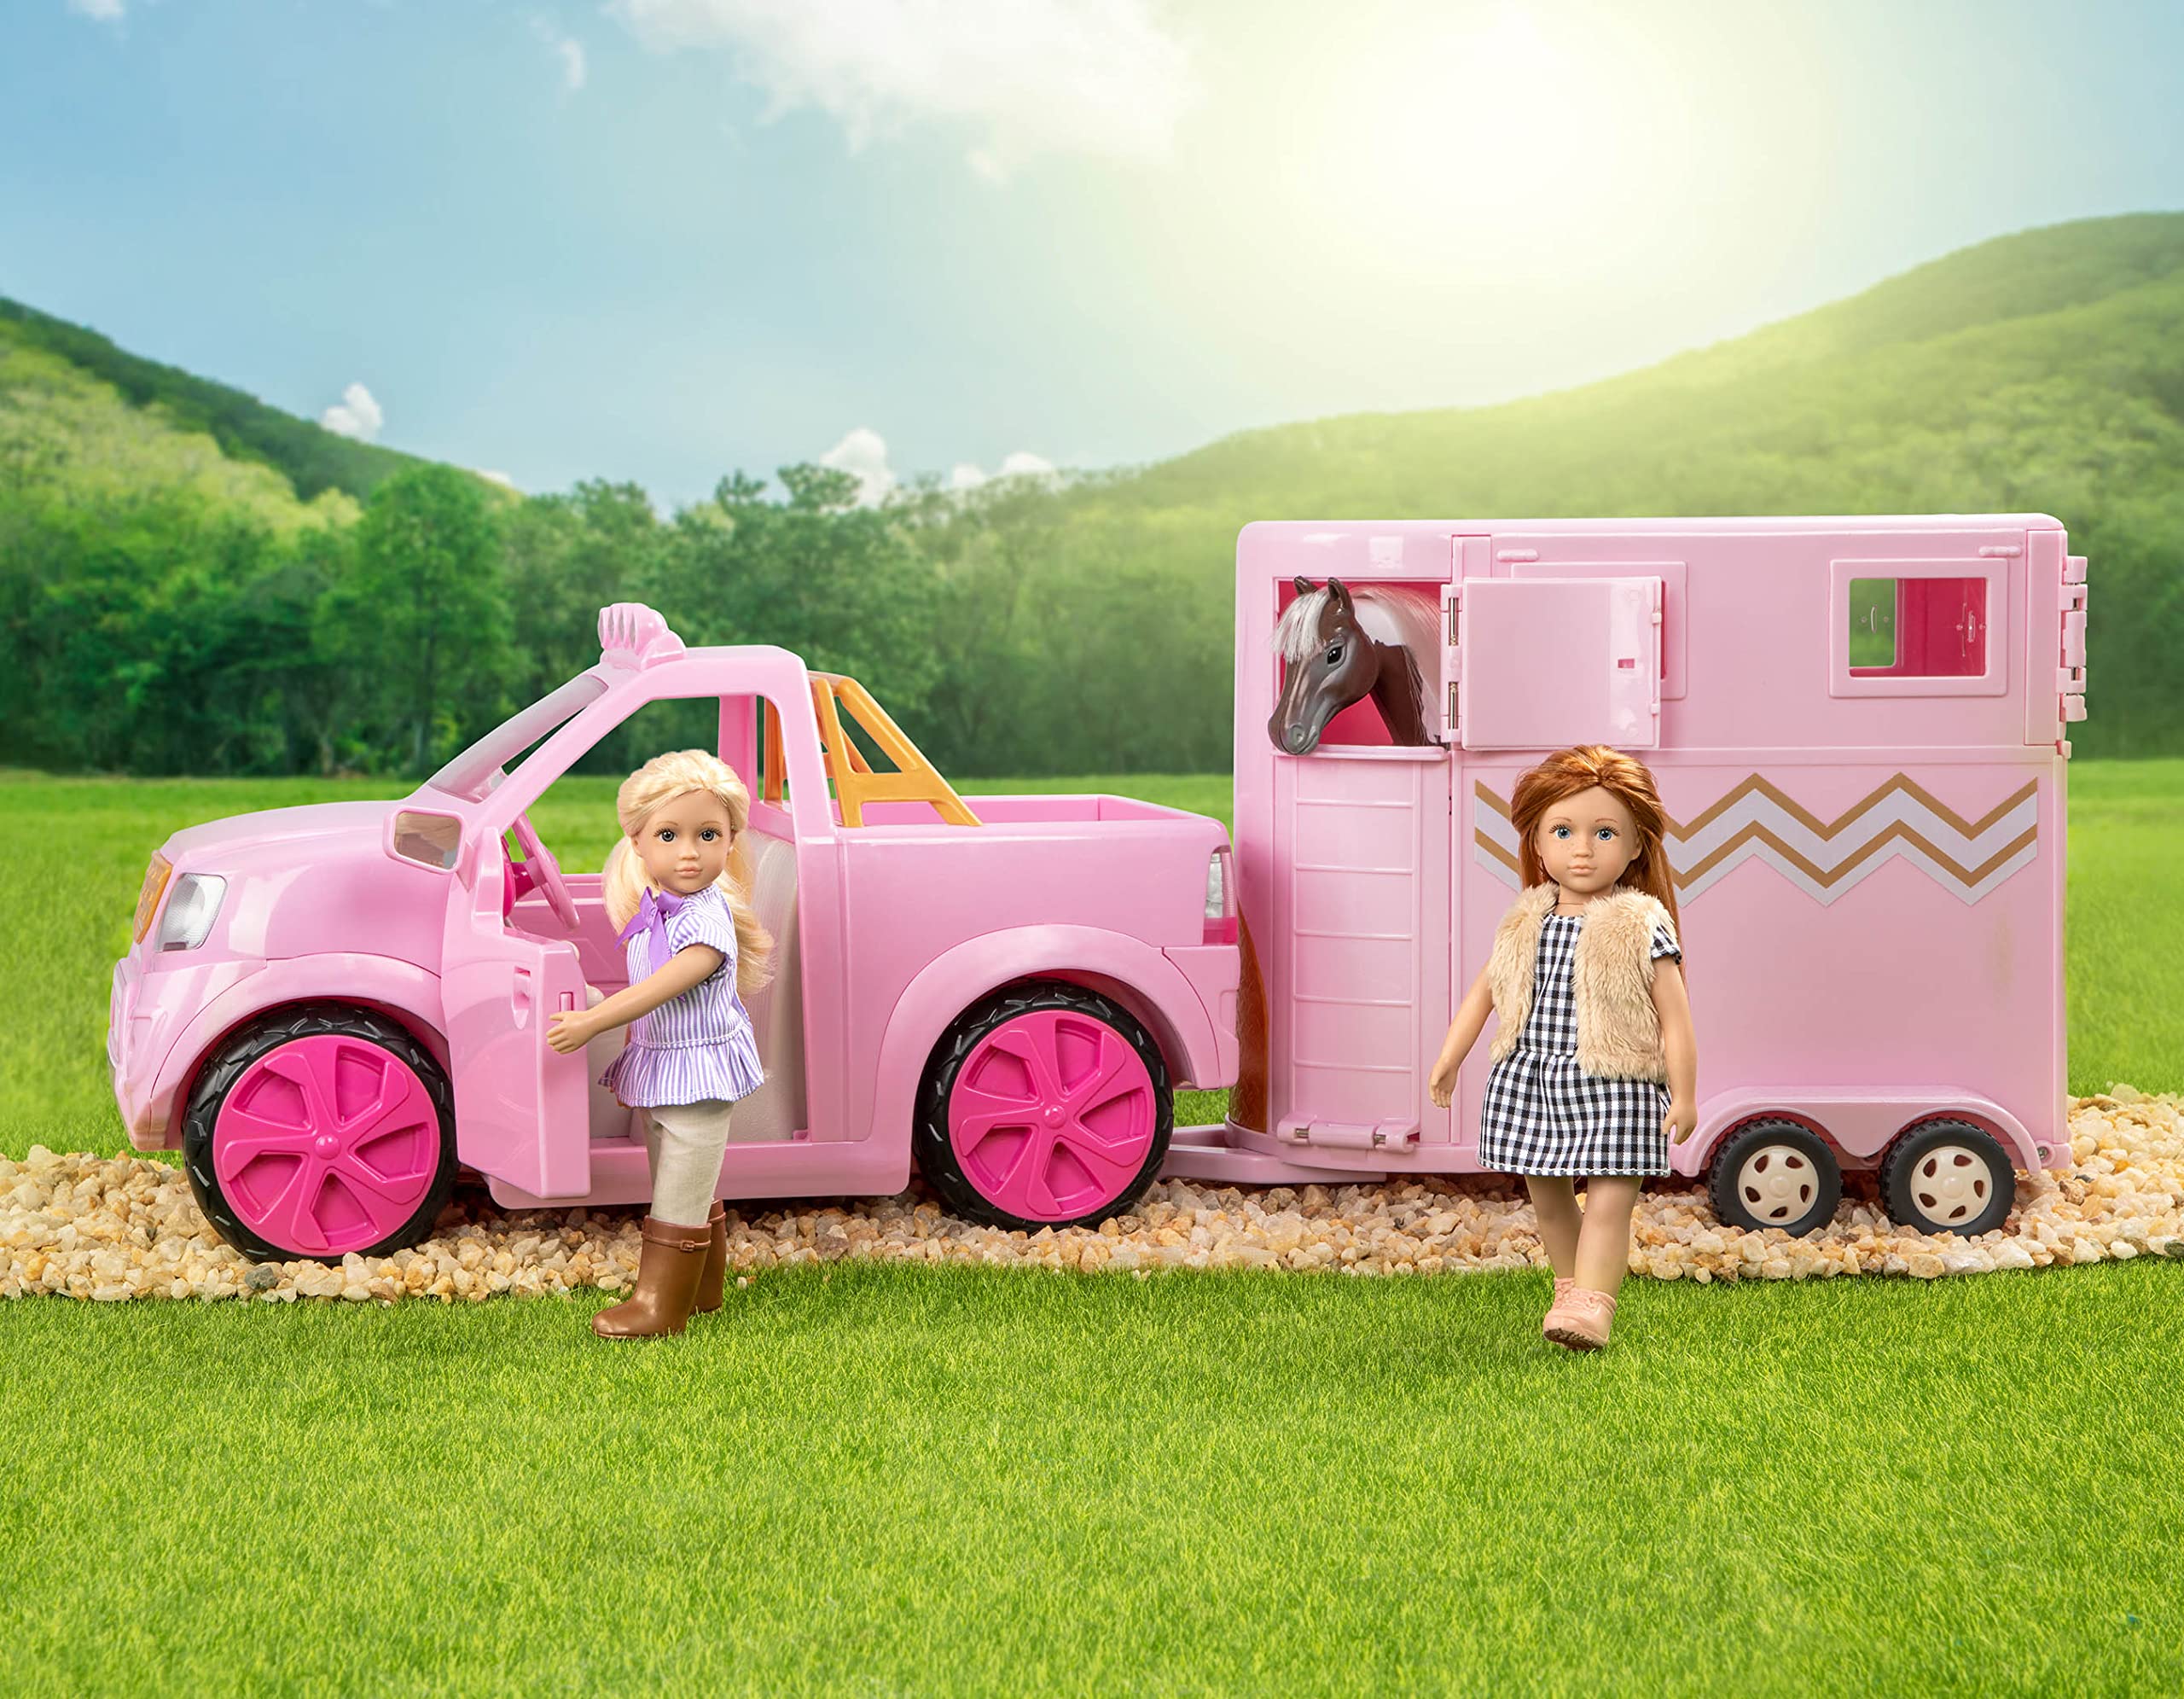 Lori Dolls – Ride & Shine Pickup Truck– Pick-Up Truck for Mini Dolls – Pink Car for 6-inch Dolls – Trailer Hitch & Openable Doors – Toy Vehicle for Kids – 3 Years + LO37113C1Z